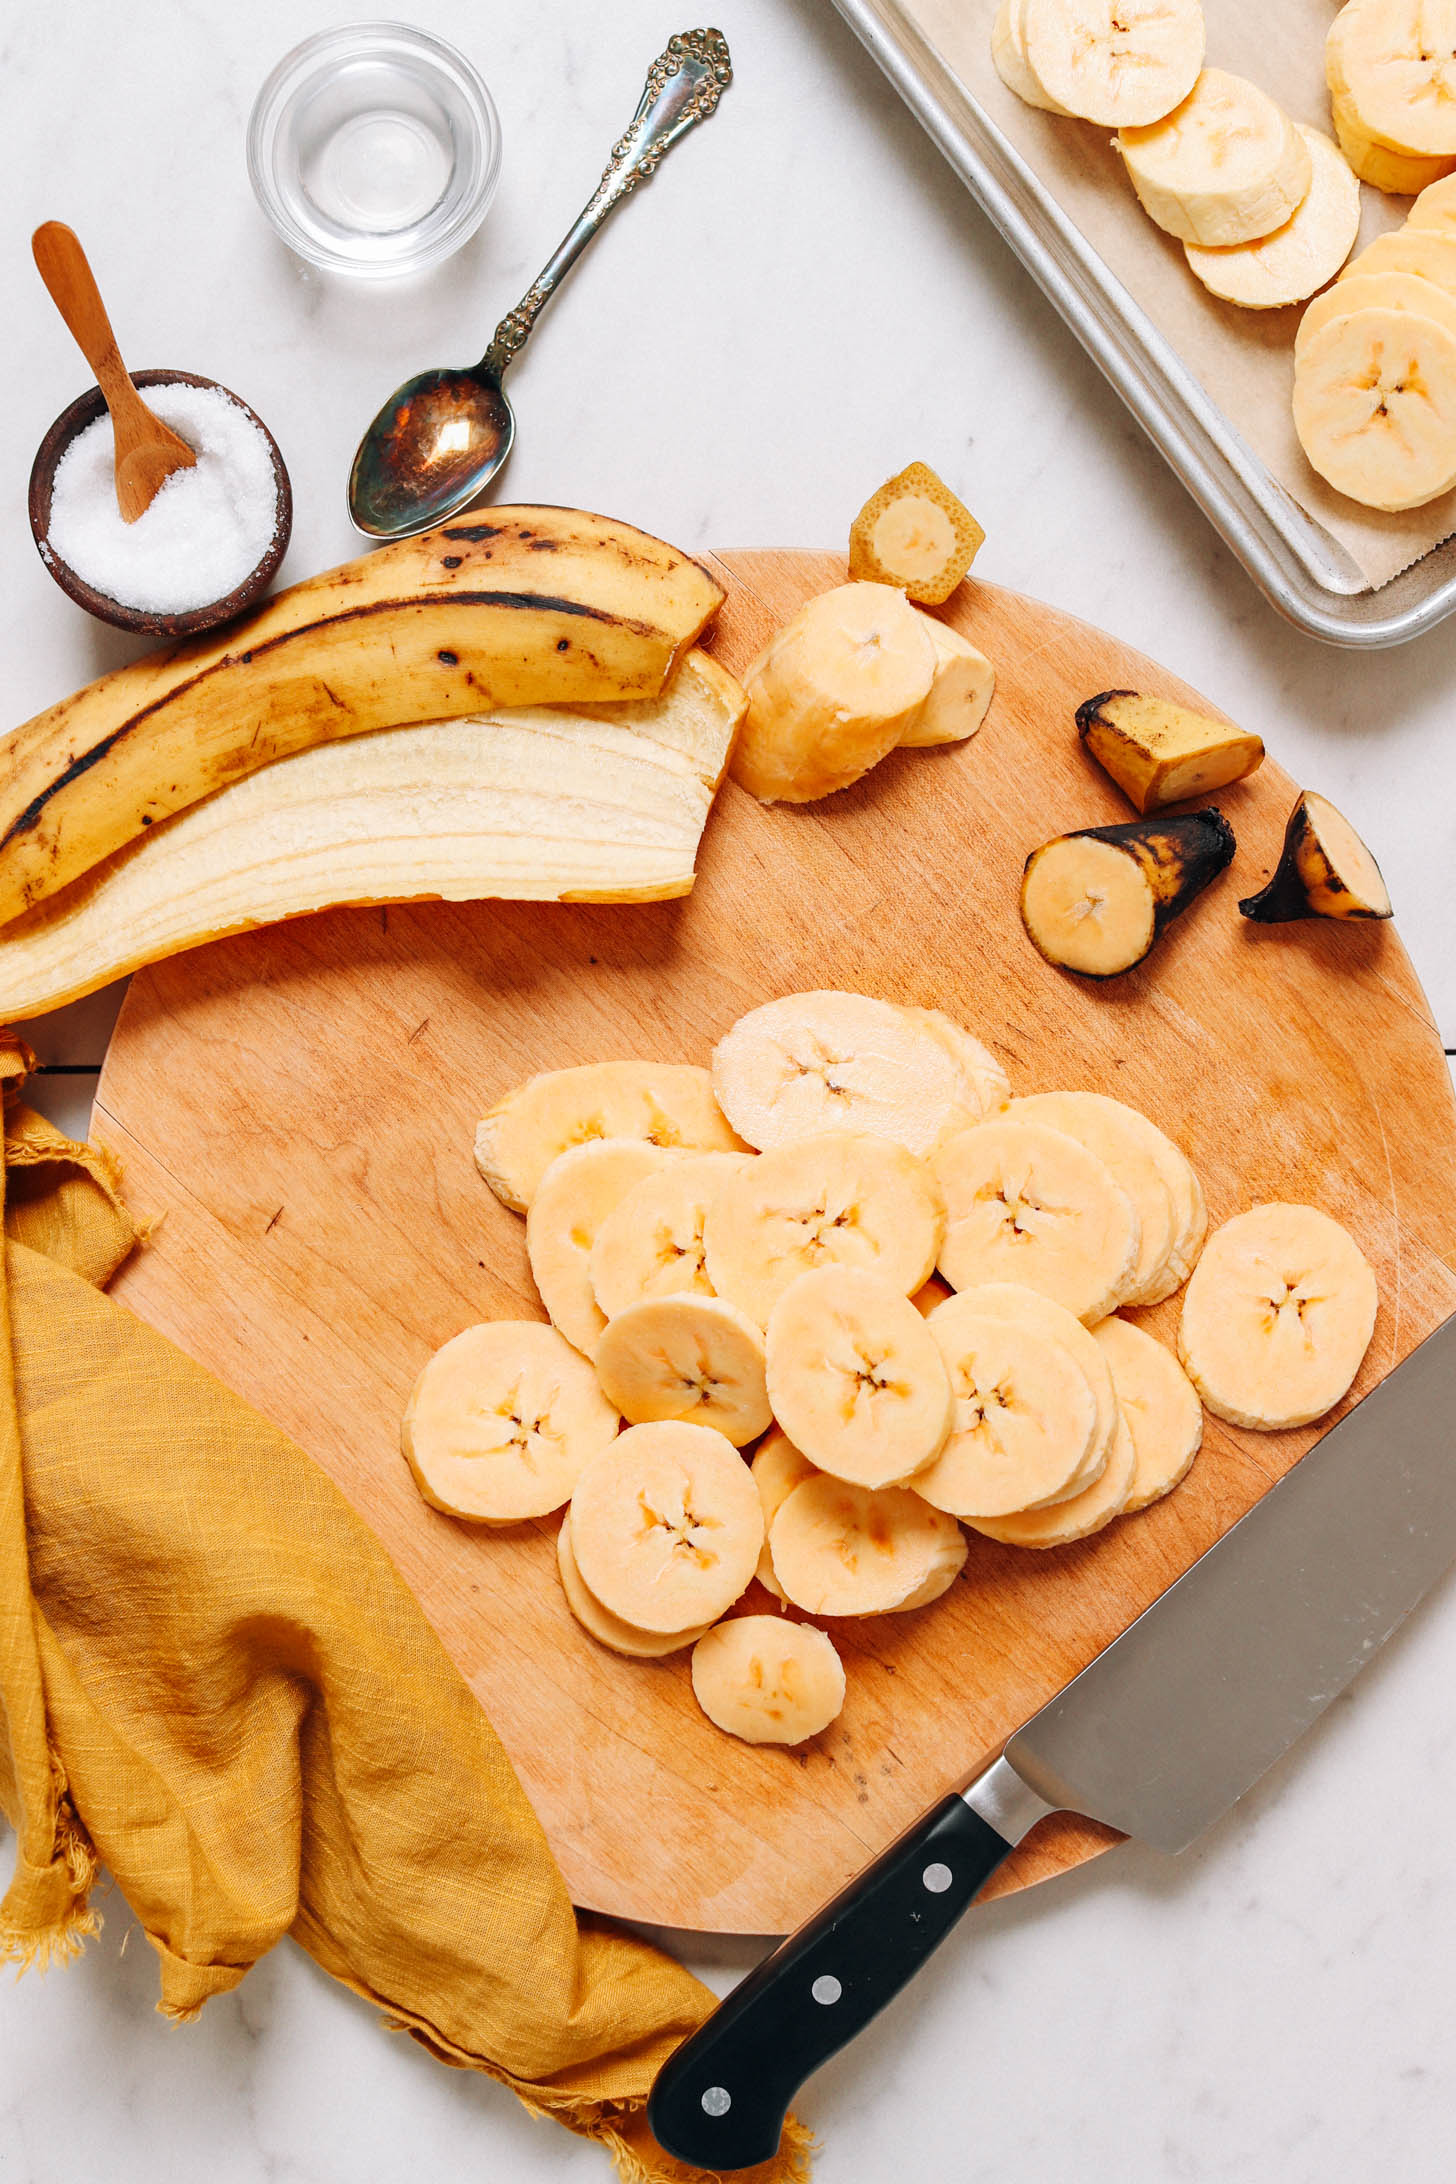 Plantain slices and peel on a cutting board